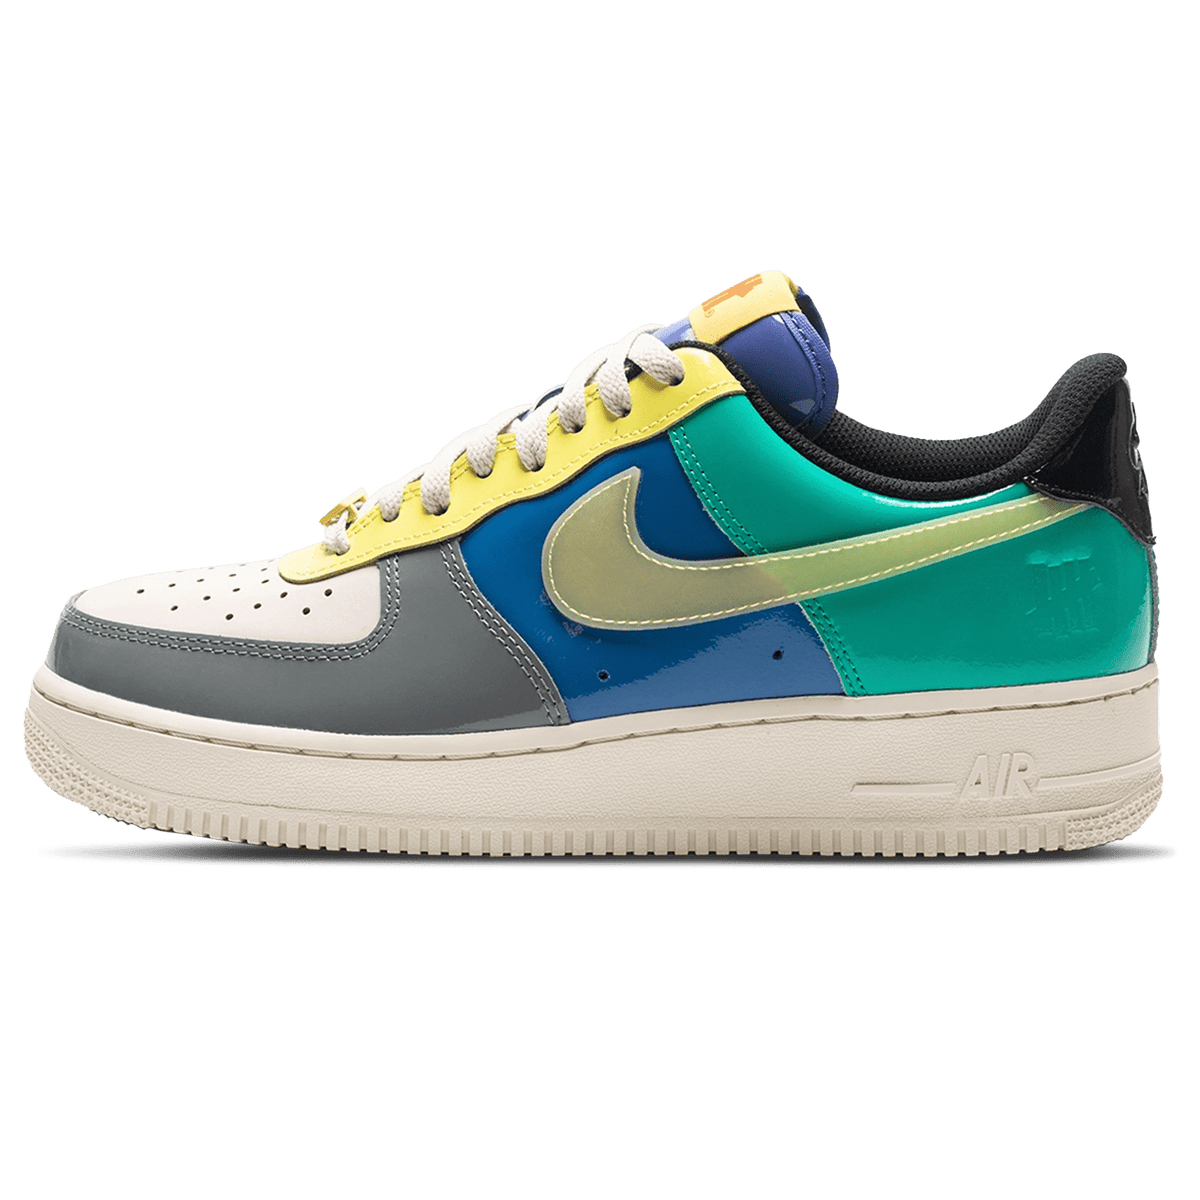 Undefeated x Nike Air Force 1 Low 'Community' - Kick Game